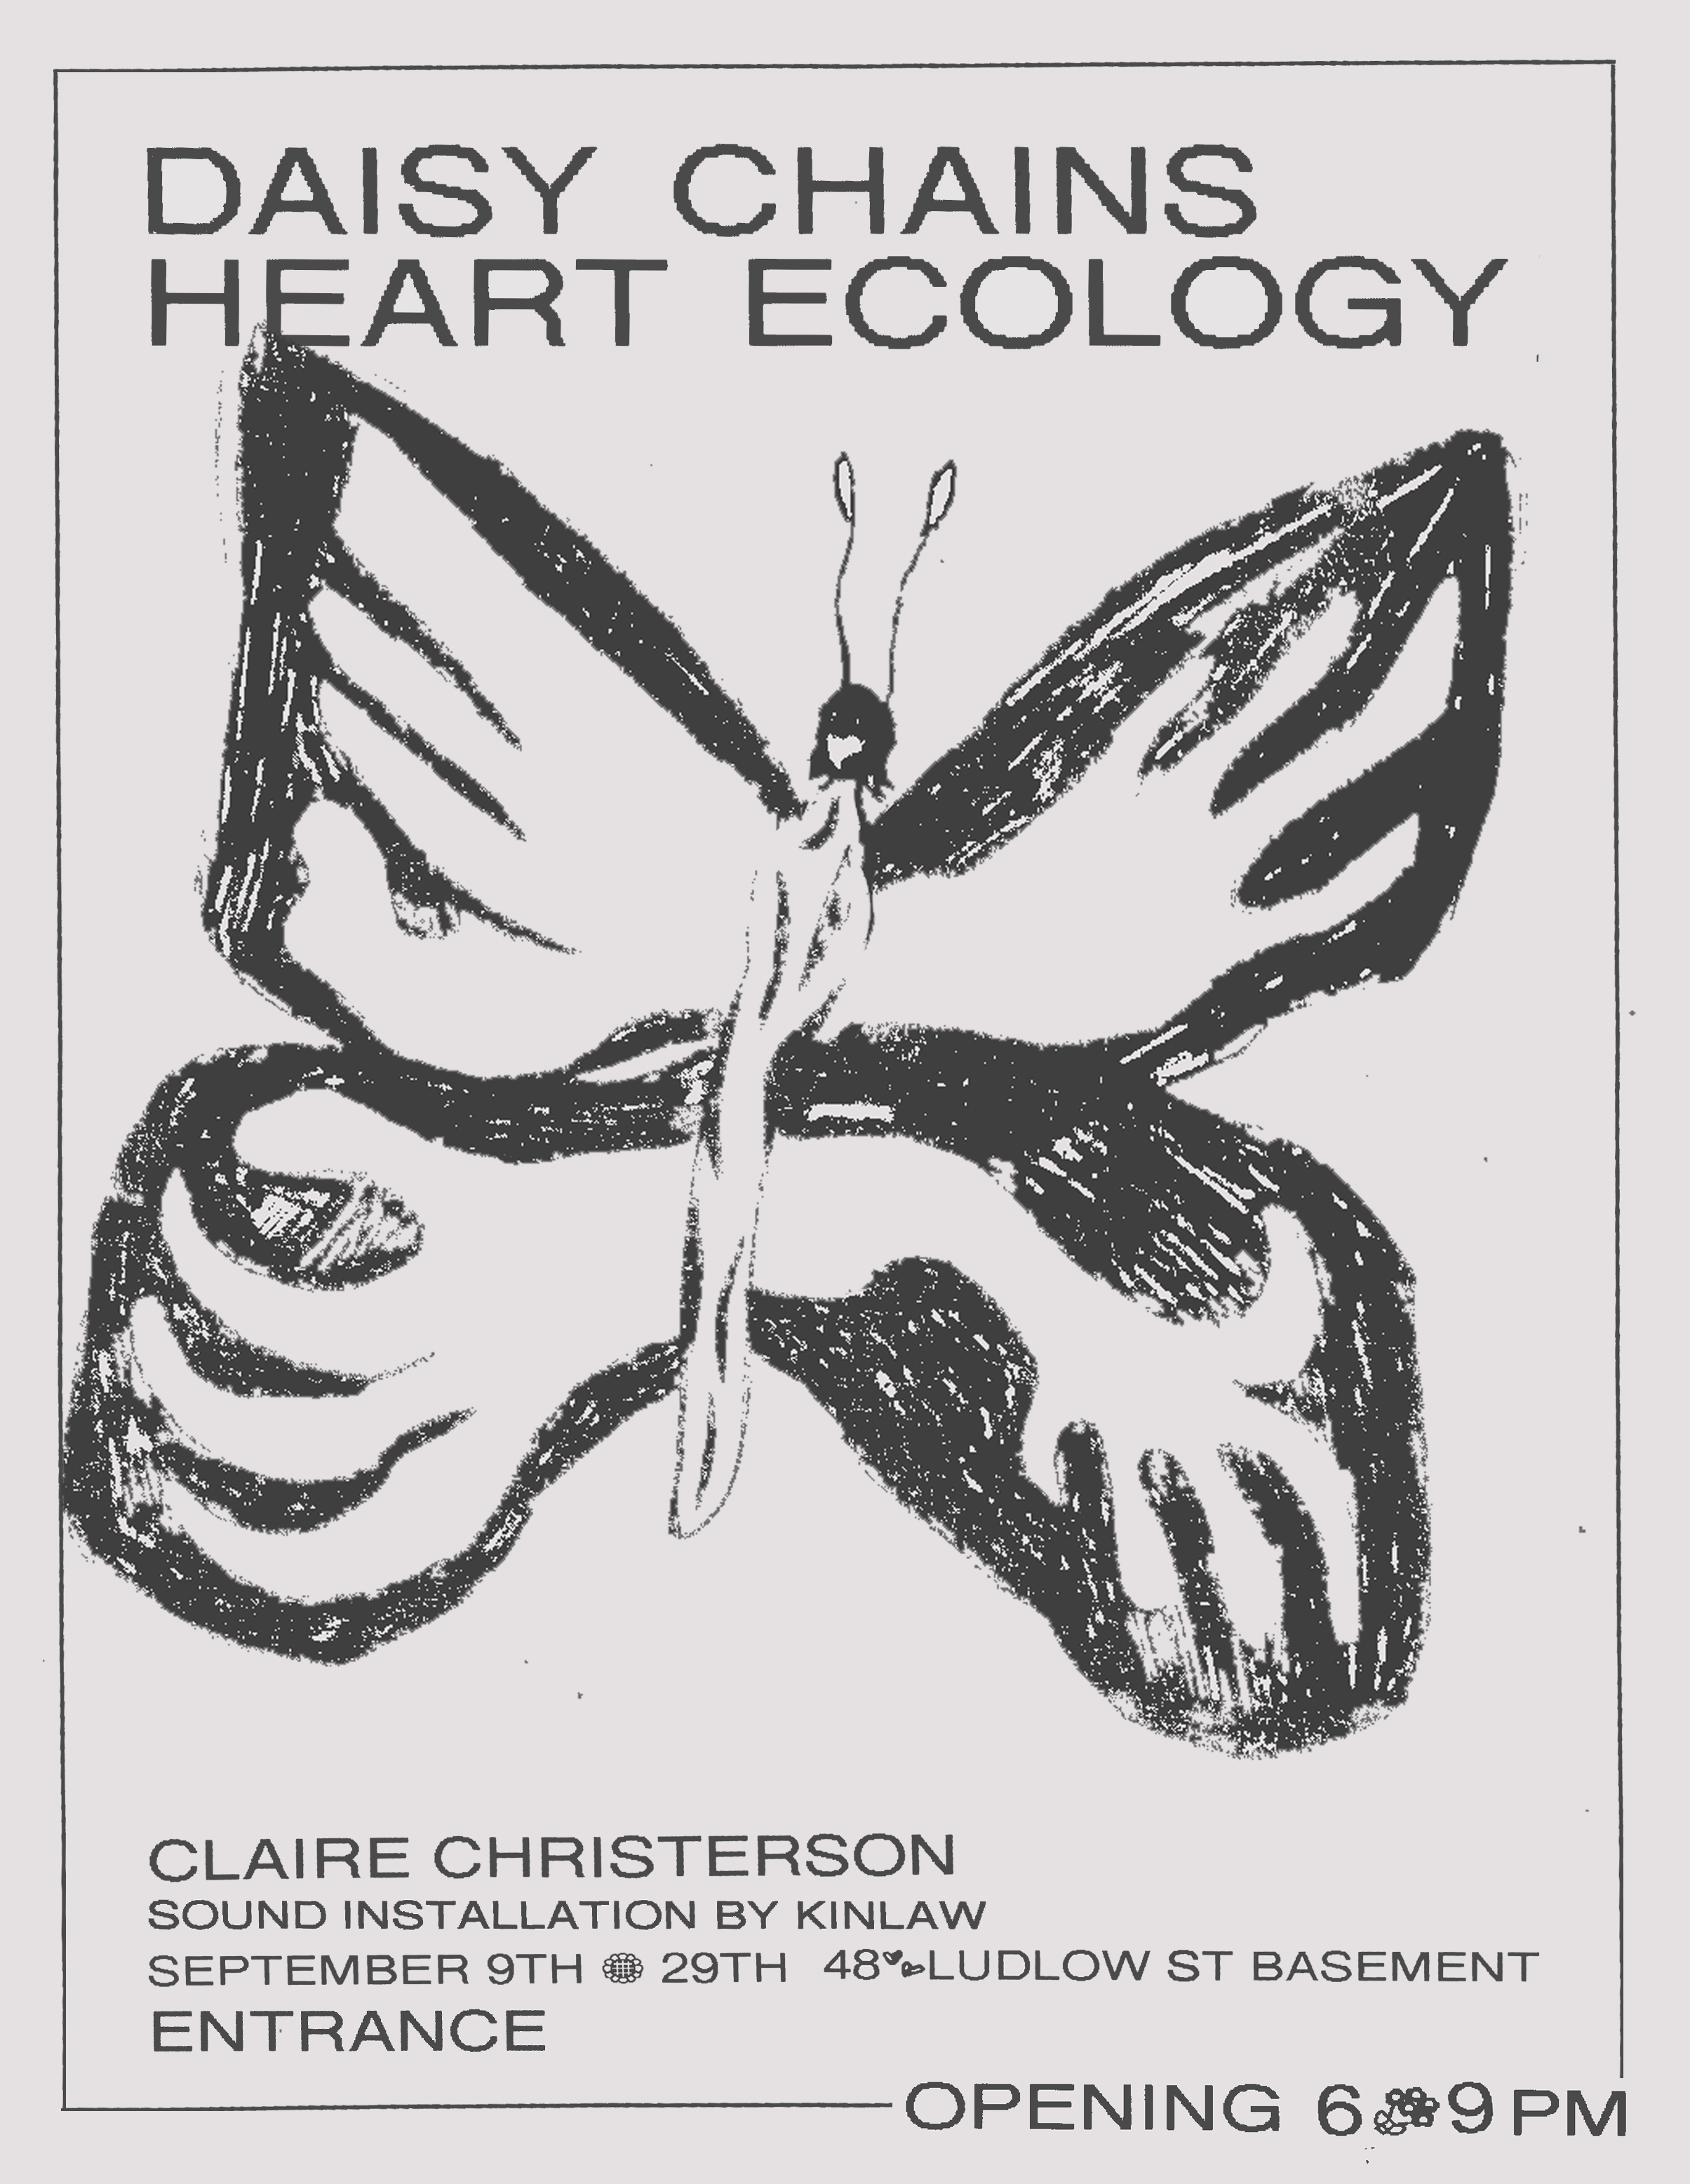 Daisy Chains Heart Ecology_Claire Christerson.jpg